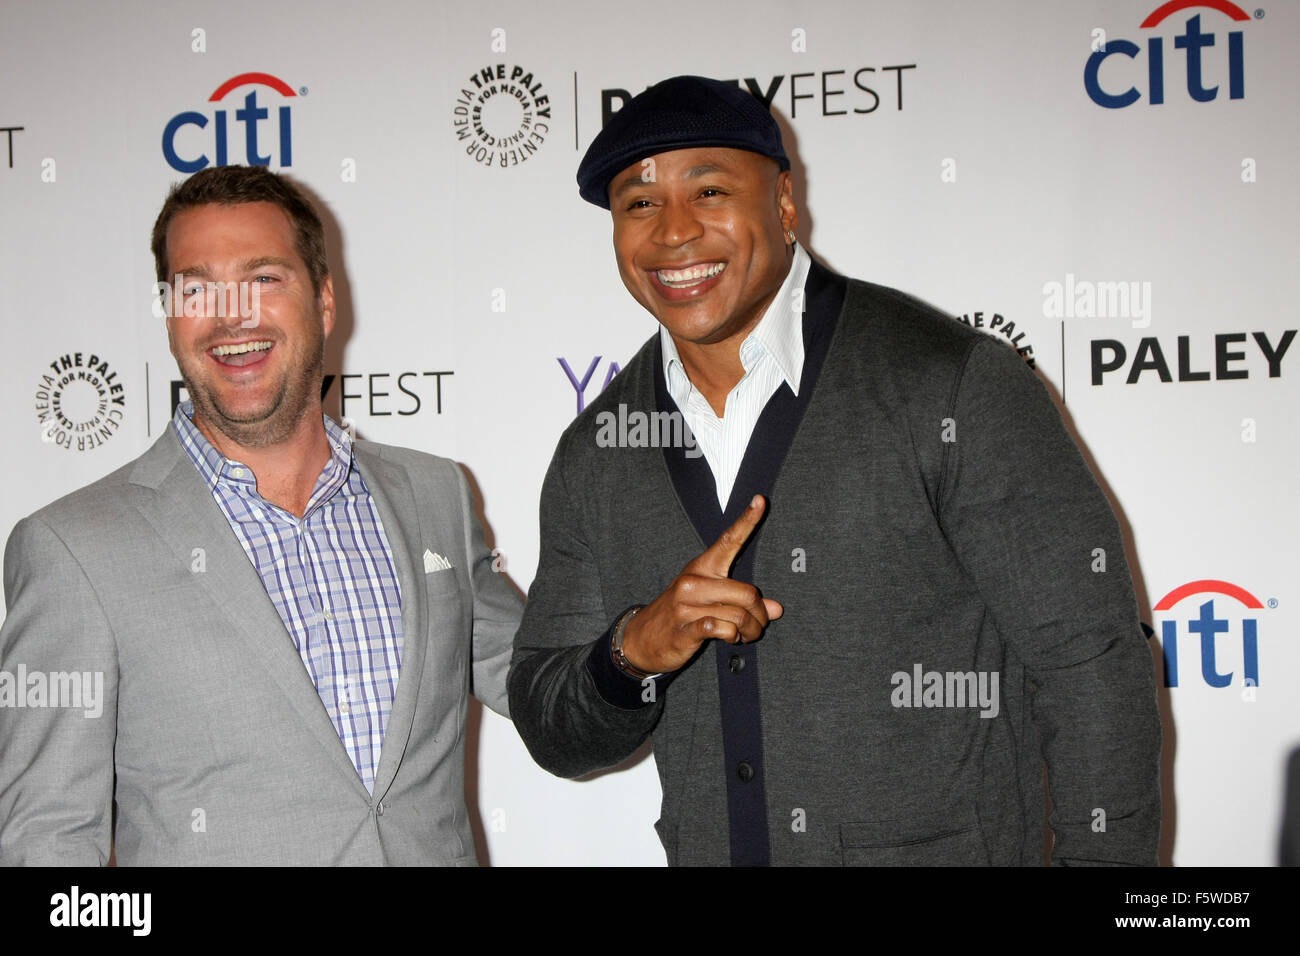 PaleyFest Special Event: 'NCIS: Los Angeles' Fall Premiere - Arrivals  Featuring: Chris O'Donnell, LL Cool J, aka James Todd Smith Where: Beverly Hills, California, United States When: 11 Sep 2015 Stock Photo